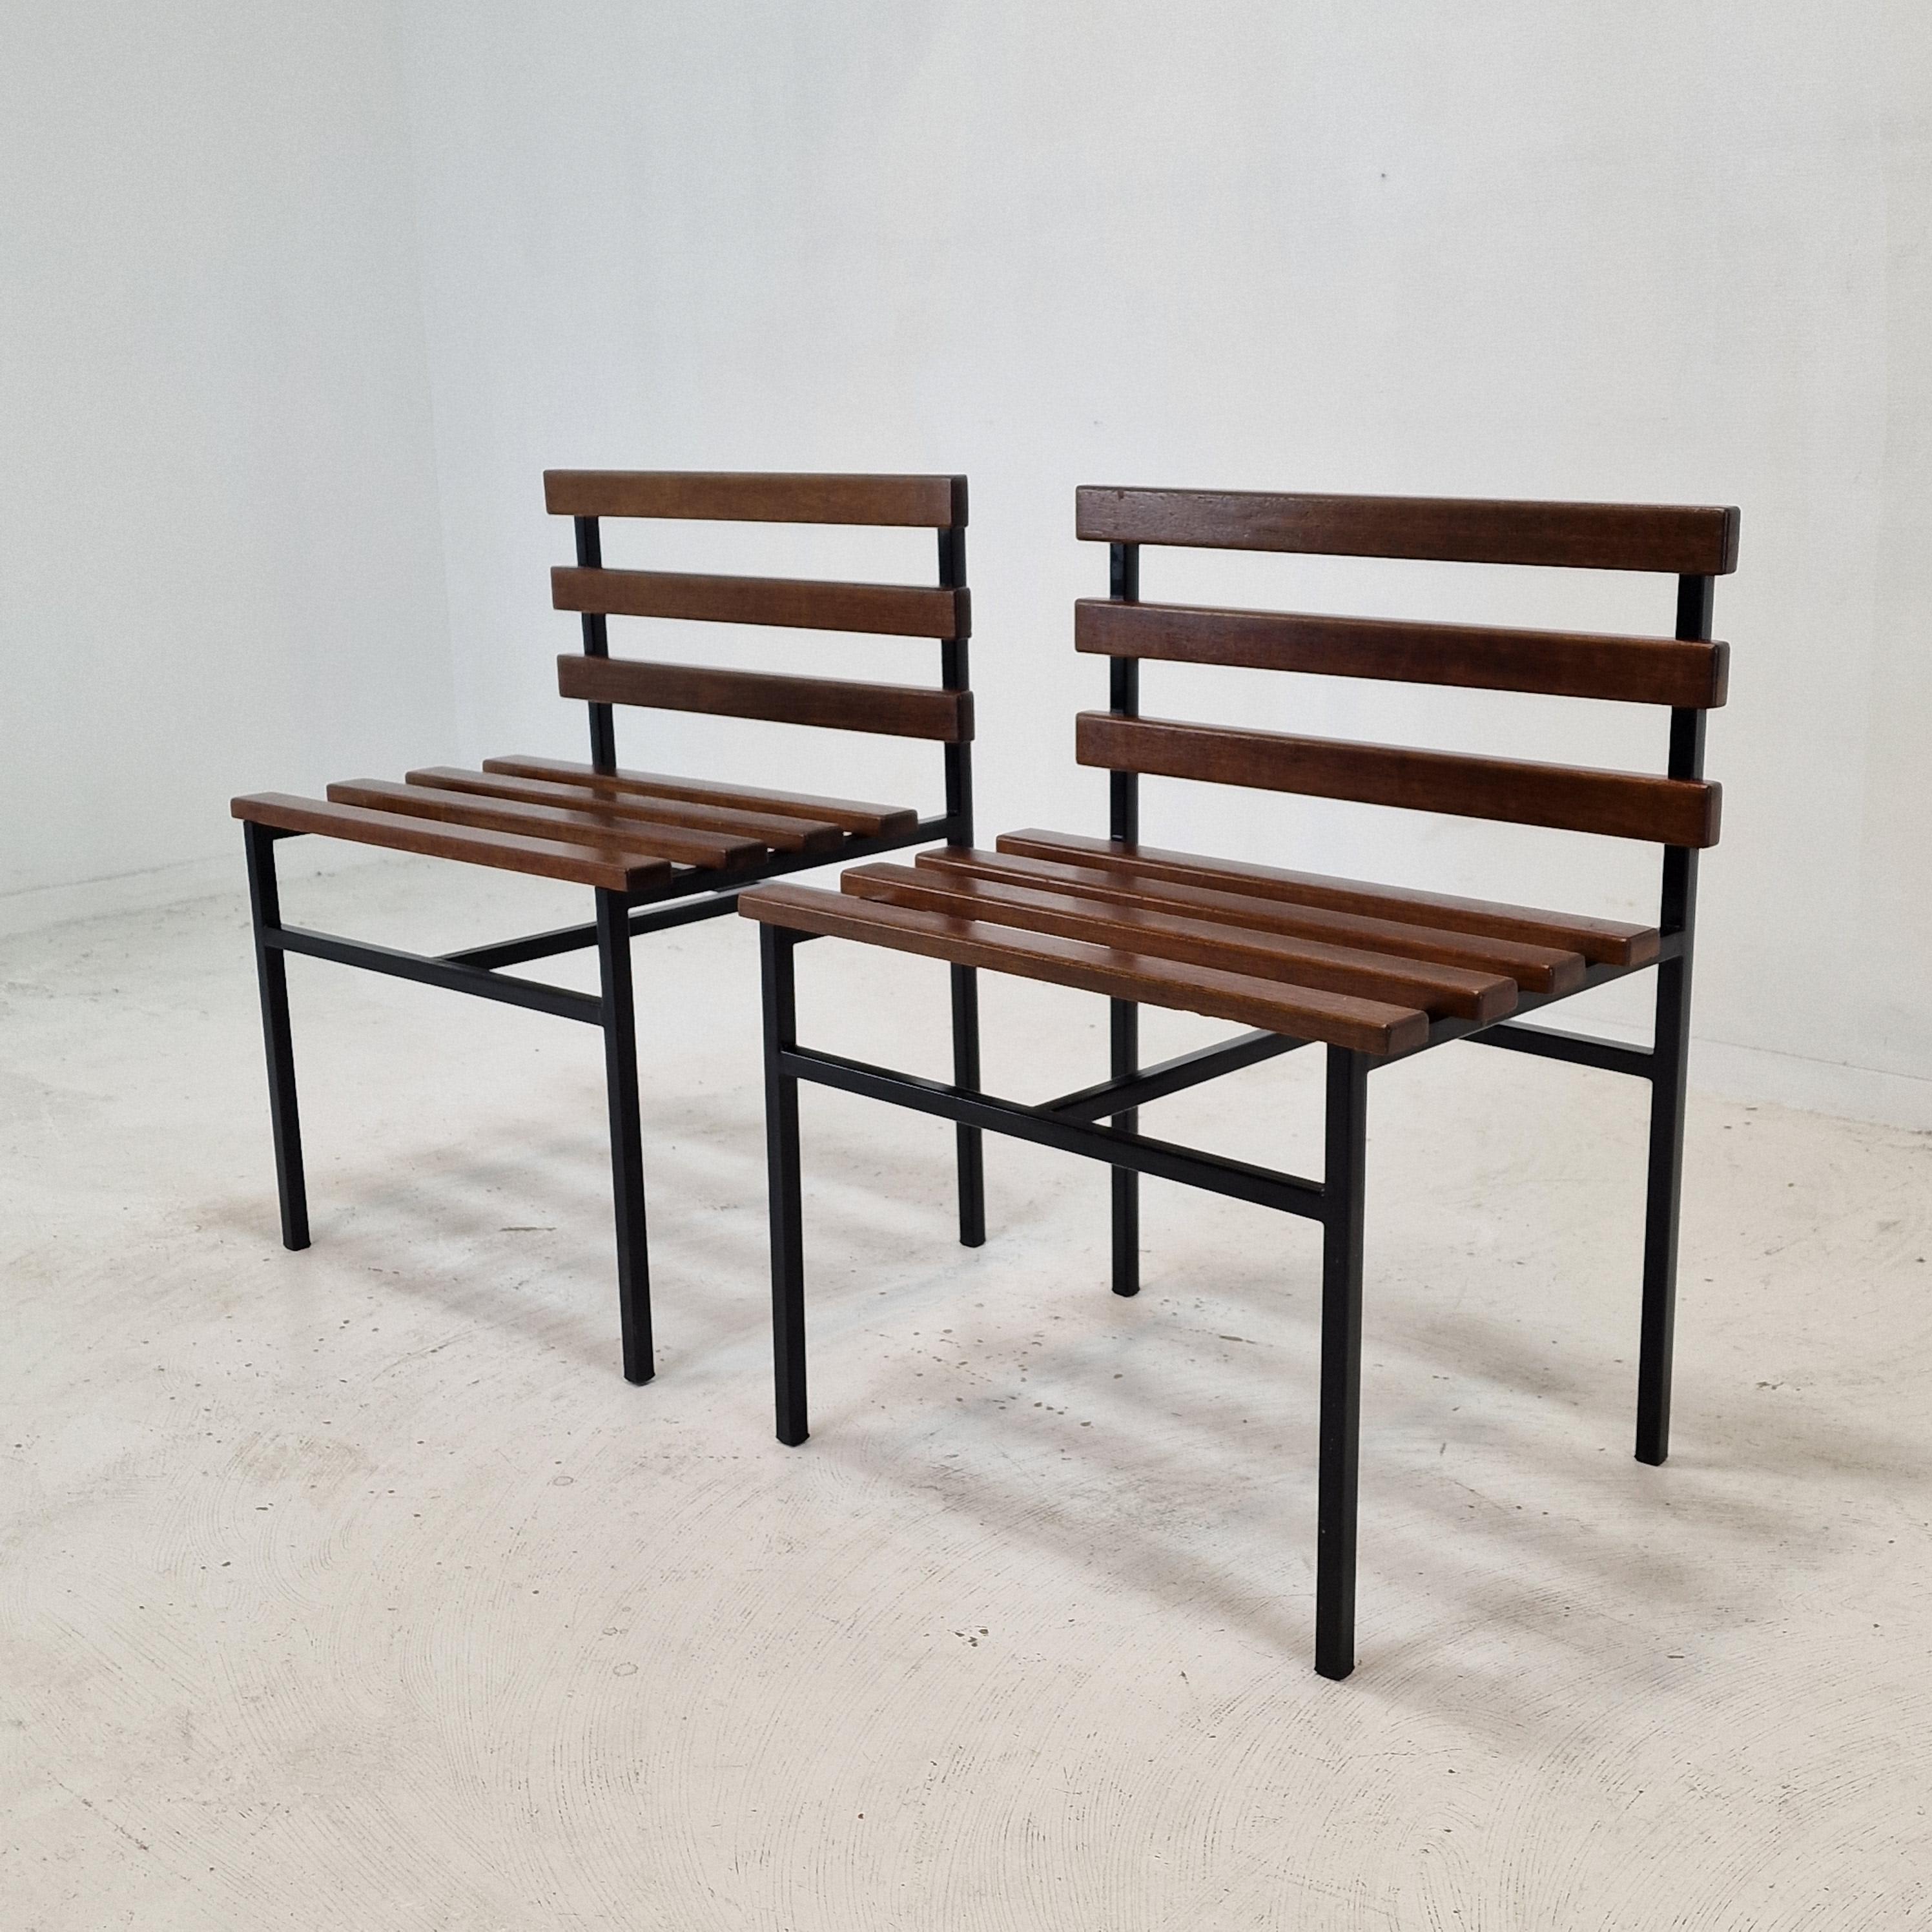 Italian Midcentury Set of 2 Chairs or Benches in Teak, Italy, 1960s For Sale